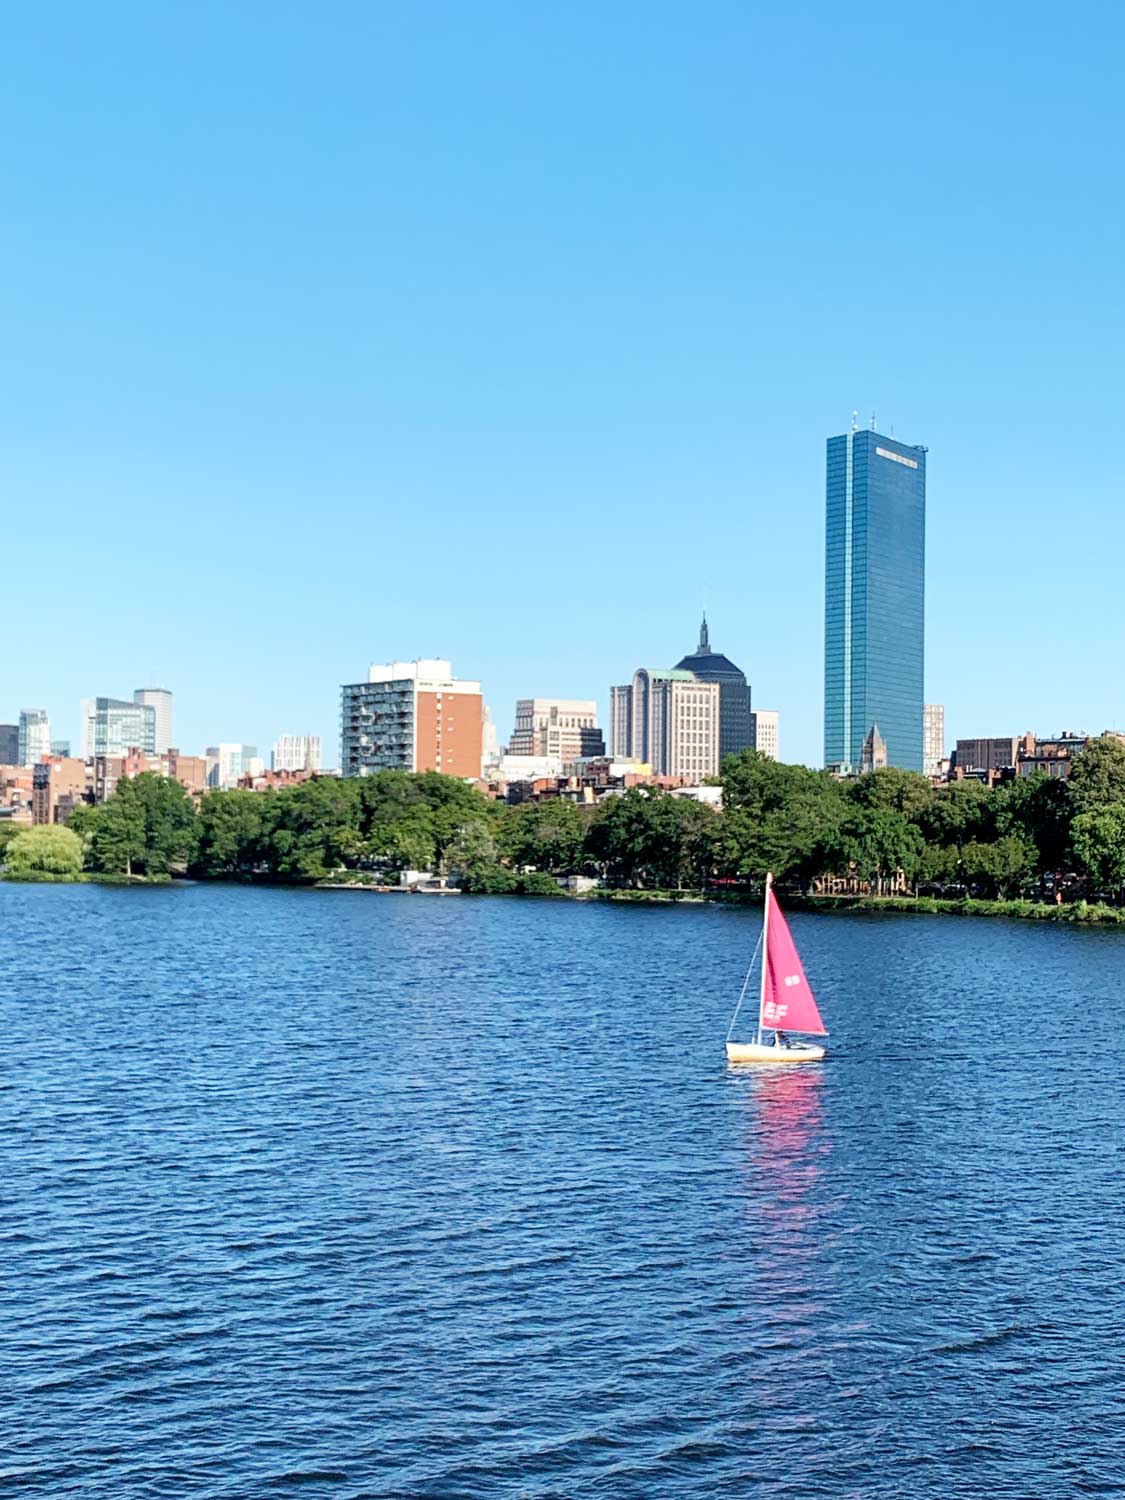 <p>View to the south bank of the Charles River from Cambridge.</p>